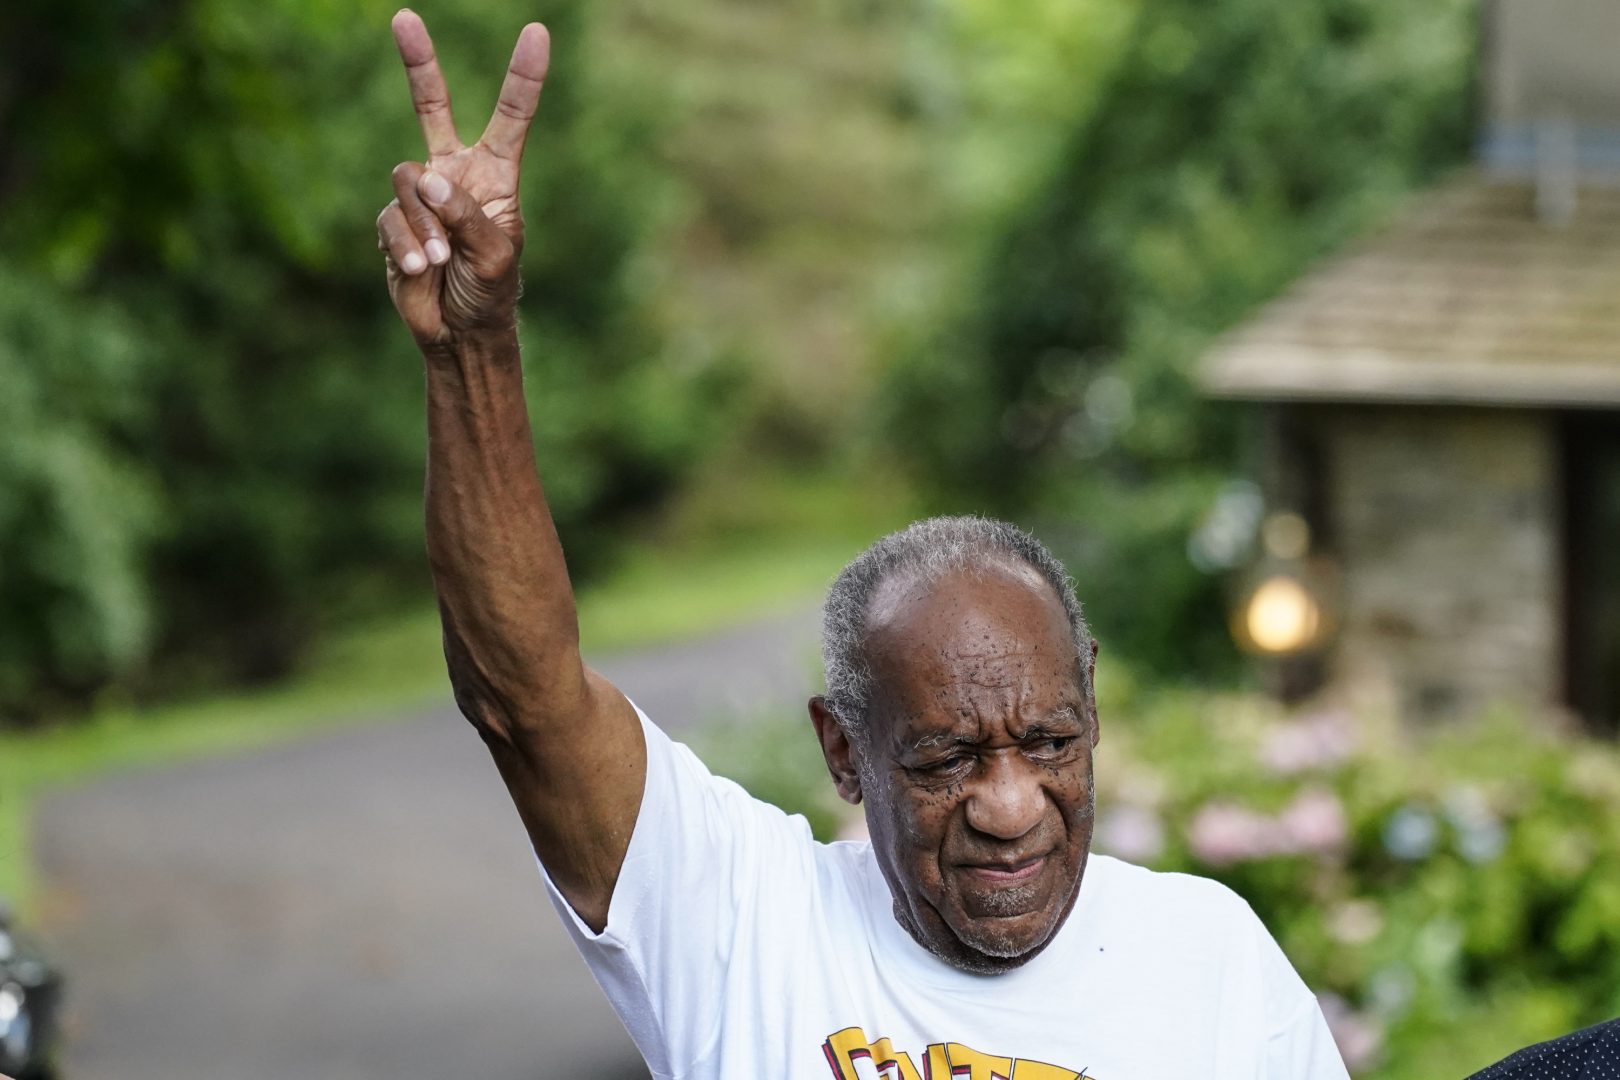 FILE - This June 30, 2021, file photo shows Bill Cosby gesturing outside his home in Elkins Park, Pa., after being released from prison. The Supreme Court said Monday, March, 7, 2022, it will not take up the sexual assault case against Cosby, leaving in place a decision by Pennsylvania's highest court to throw out his conviction and set him free from prison. The high court declined prosecutors' request to hear the case and reinstate Cosby's conviction. The Pennsylvania Supreme Court last year threw out Cosby's conviction, saying the prosecutor who brought the case was bound by his predecessor's agreement not to charge Cosby. (AP Photo/Matt Rourke, File)